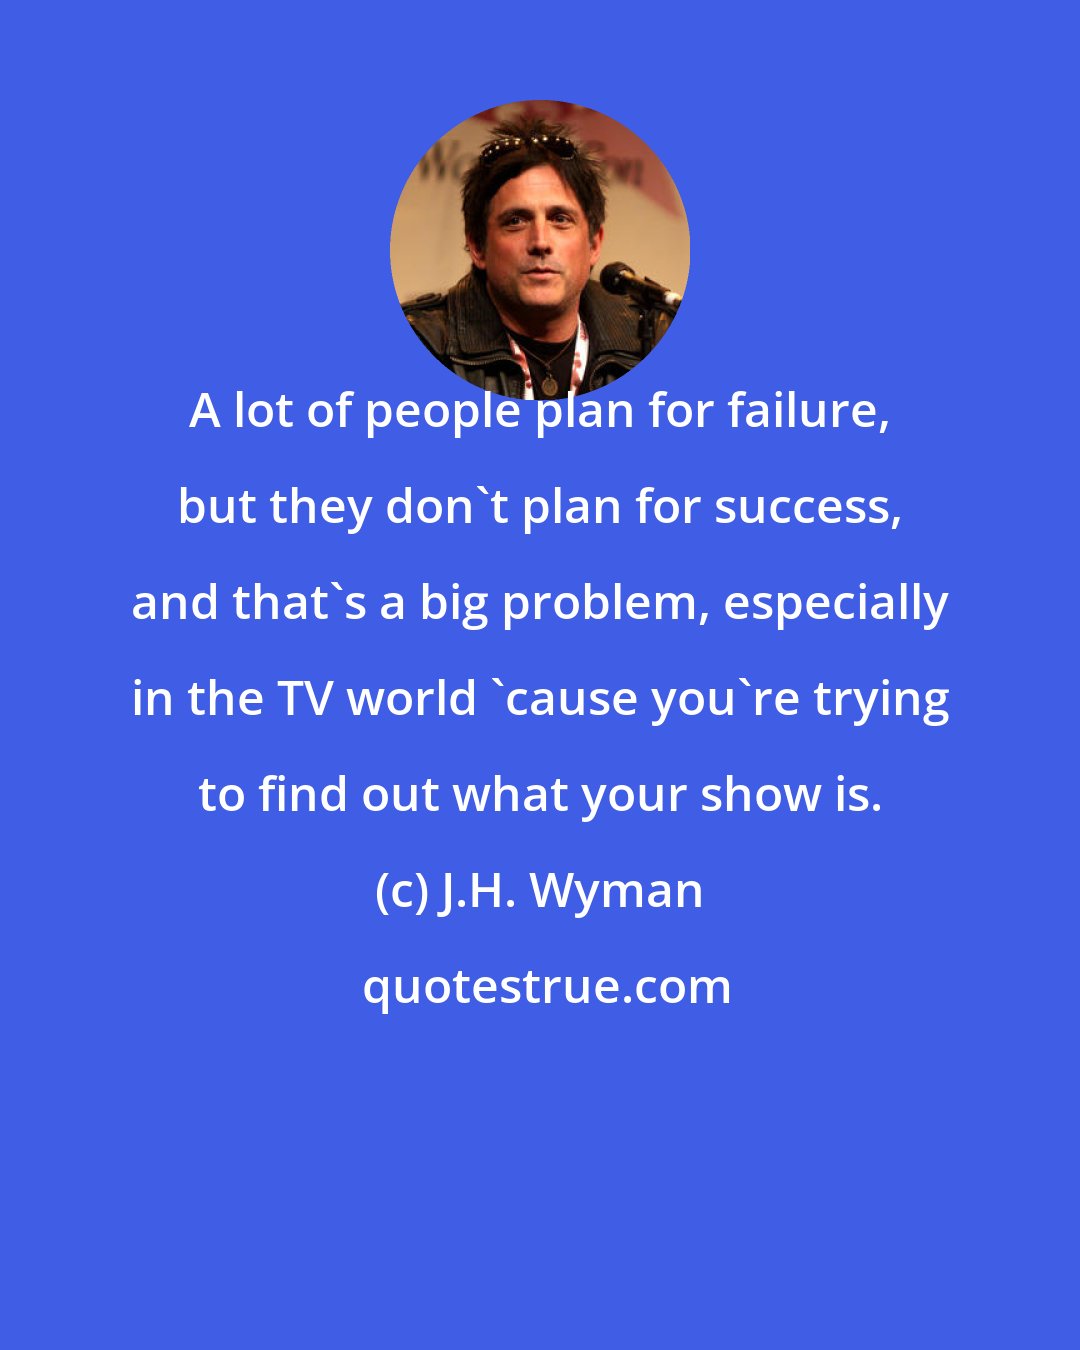 J.H. Wyman: A lot of people plan for failure, but they don't plan for success, and that's a big problem, especially in the TV world 'cause you're trying to find out what your show is.